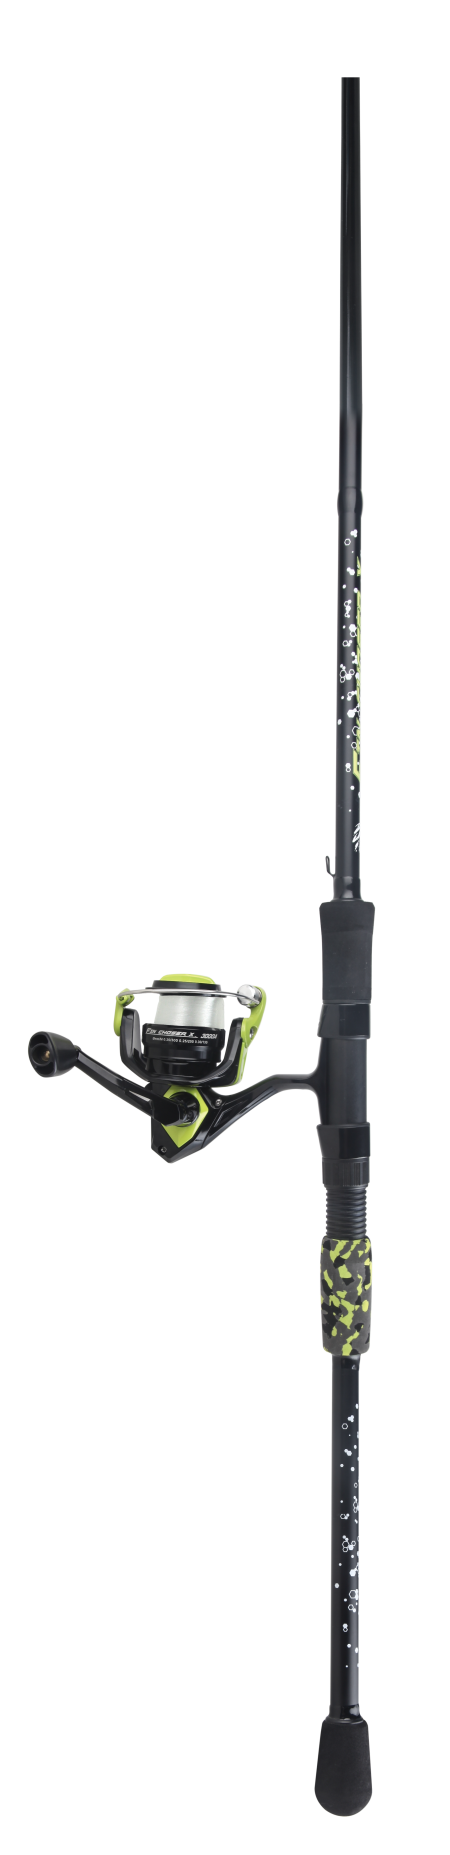 Fin Chaser X Series Combos (NEW)  OKUMA Fishing Rods and Reels